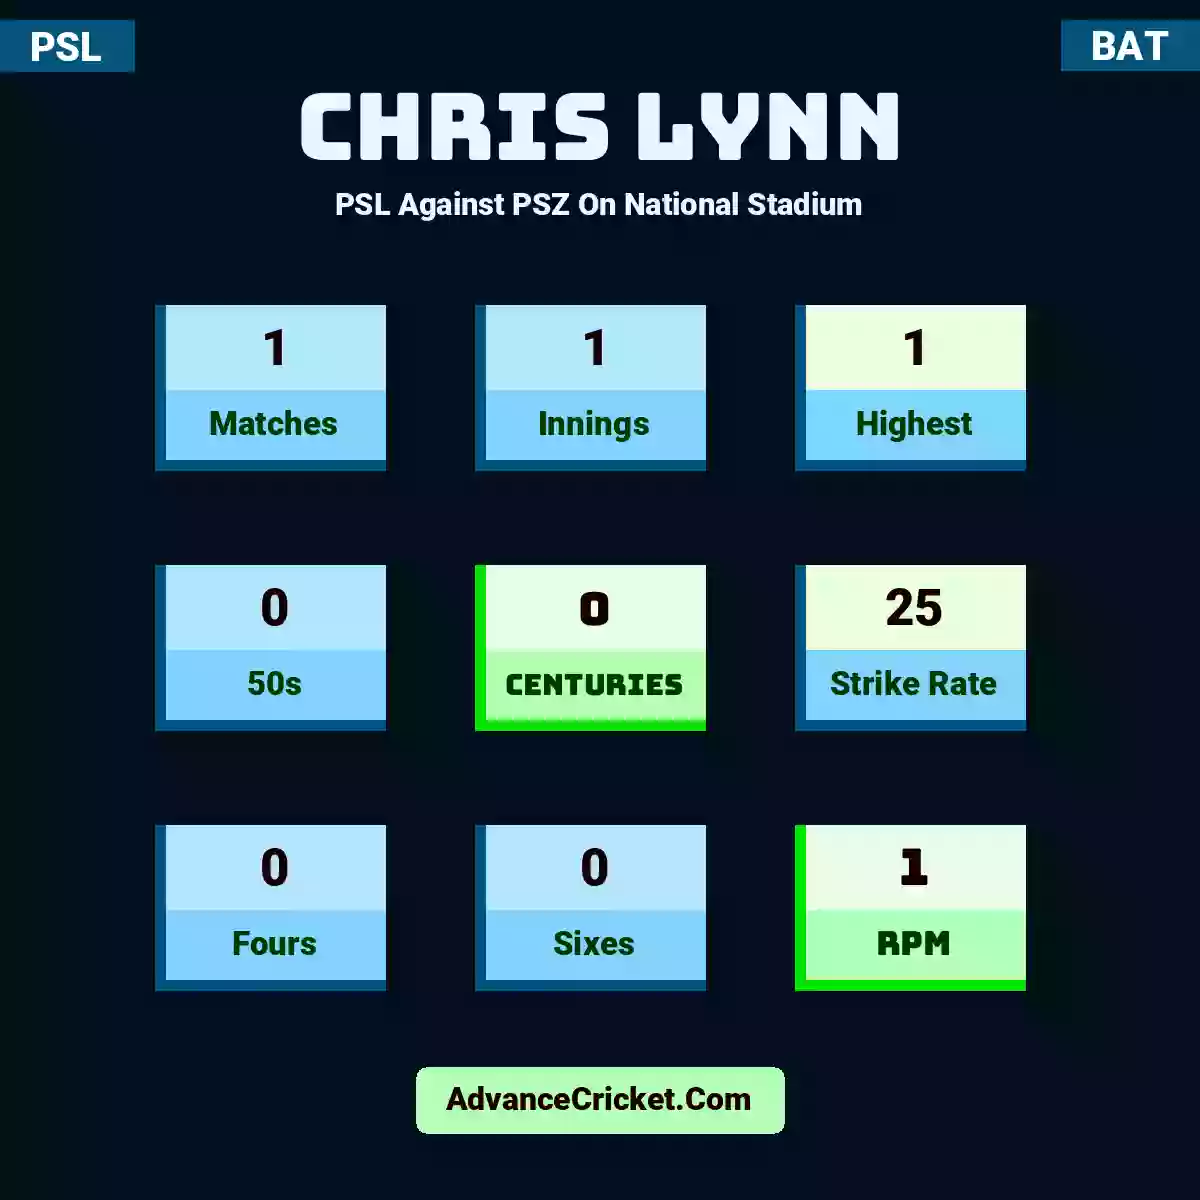 Chris Lynn PSL  Against PSZ On National Stadium, Chris Lynn played 1 matches, scored 1 runs as highest, 0 half-centuries, and 0 centuries, with a strike rate of 25. C.Lynn hit 0 fours and 0 sixes, with an RPM of 1.